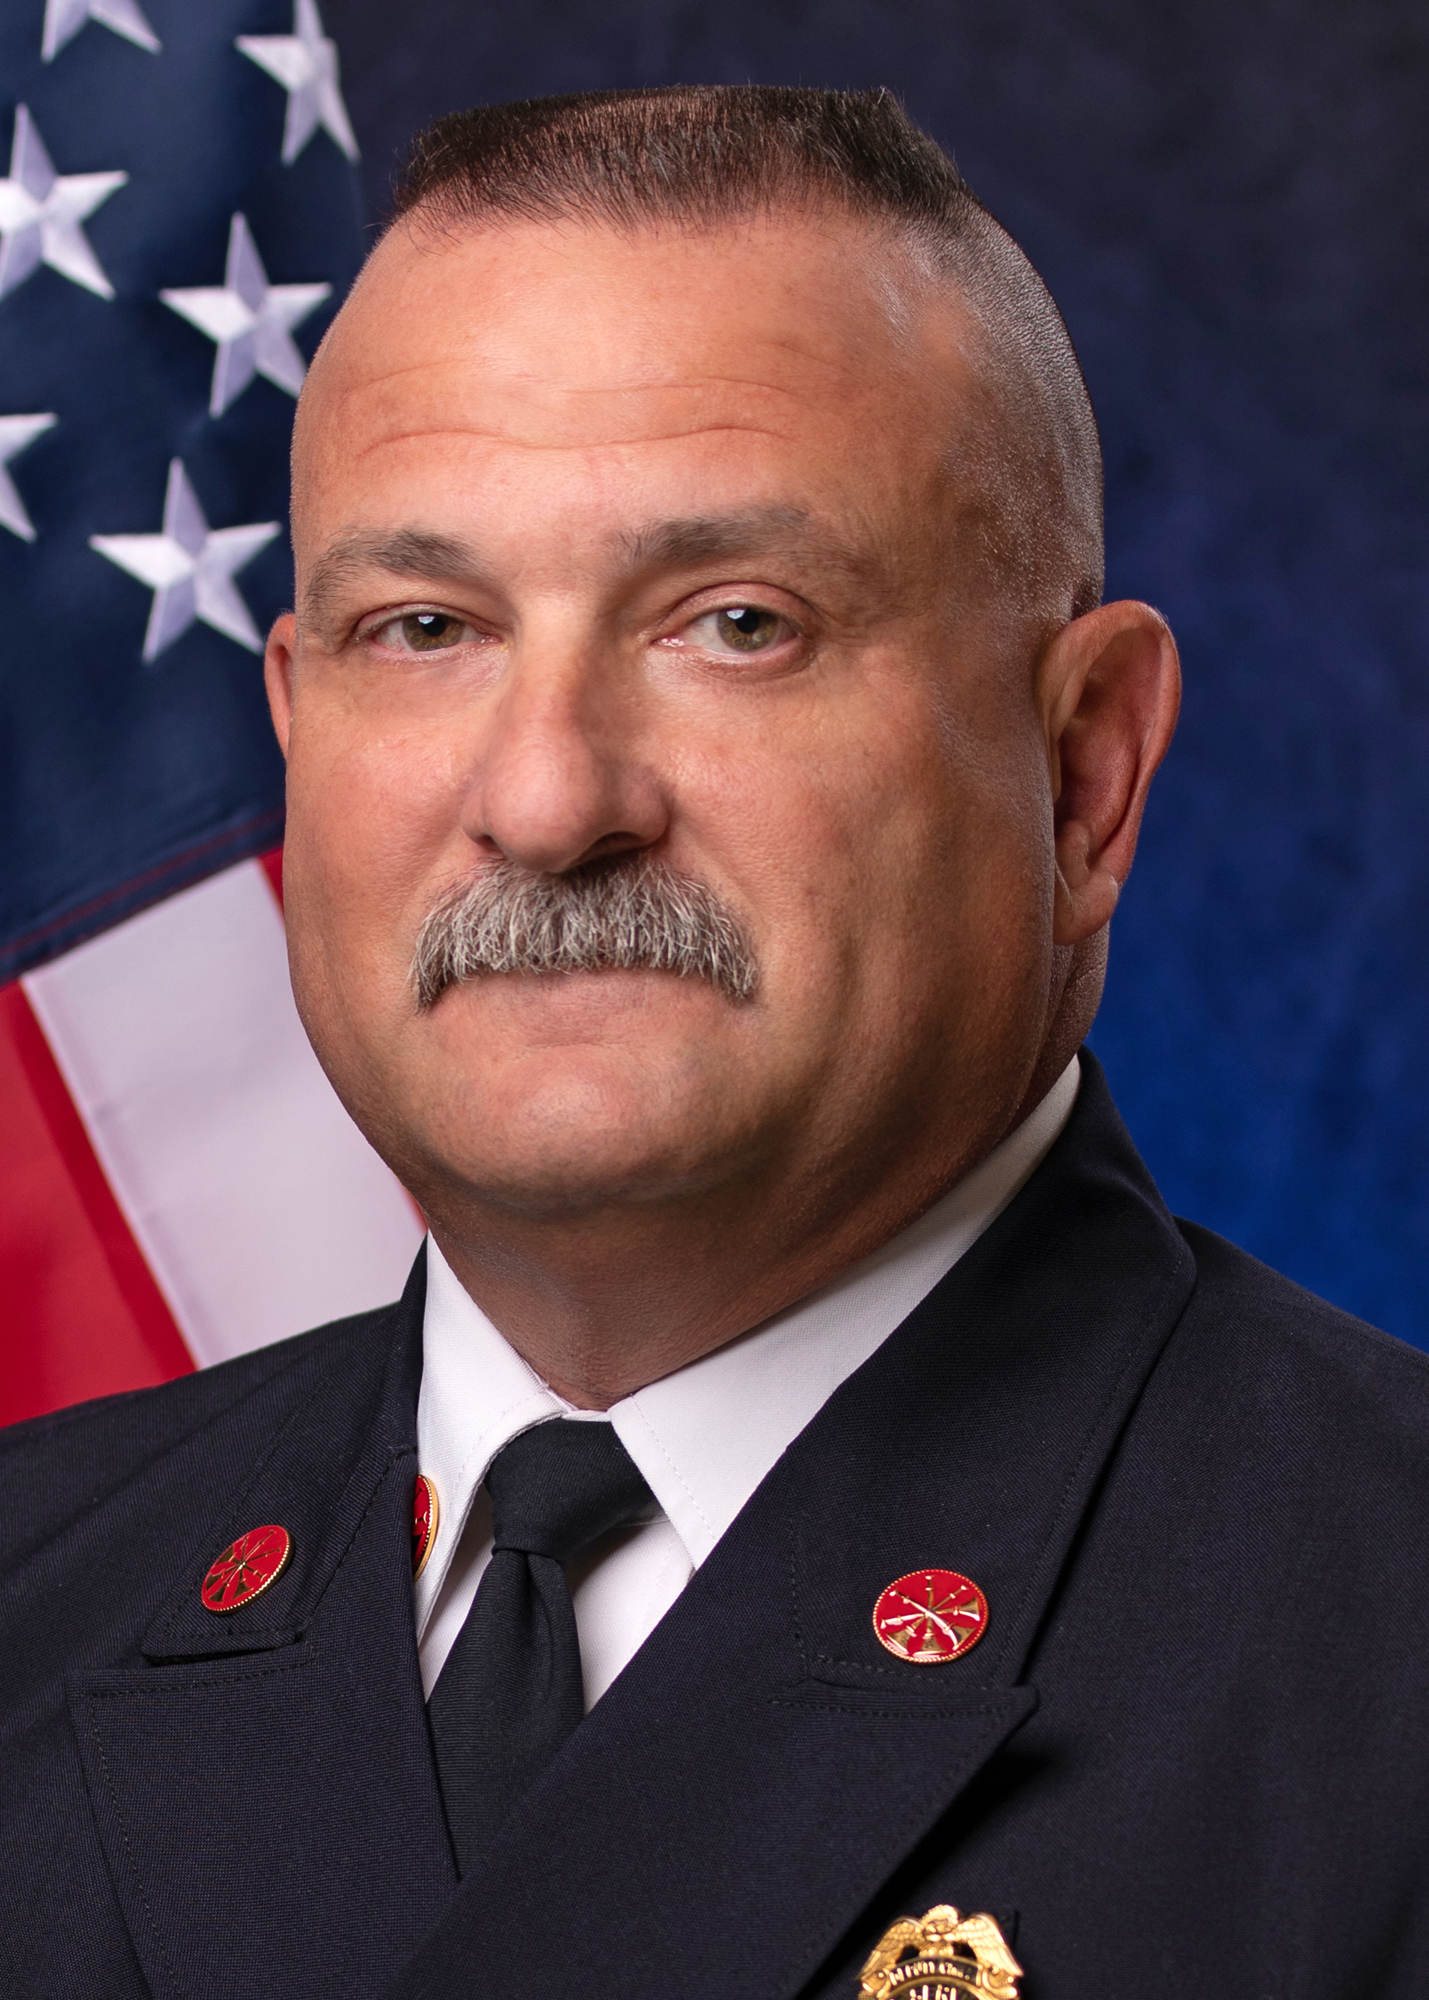 Joe King, a firefighter for 32 years, was named director and fire chief for Volusia County Fire Rescue. Courtesy photo